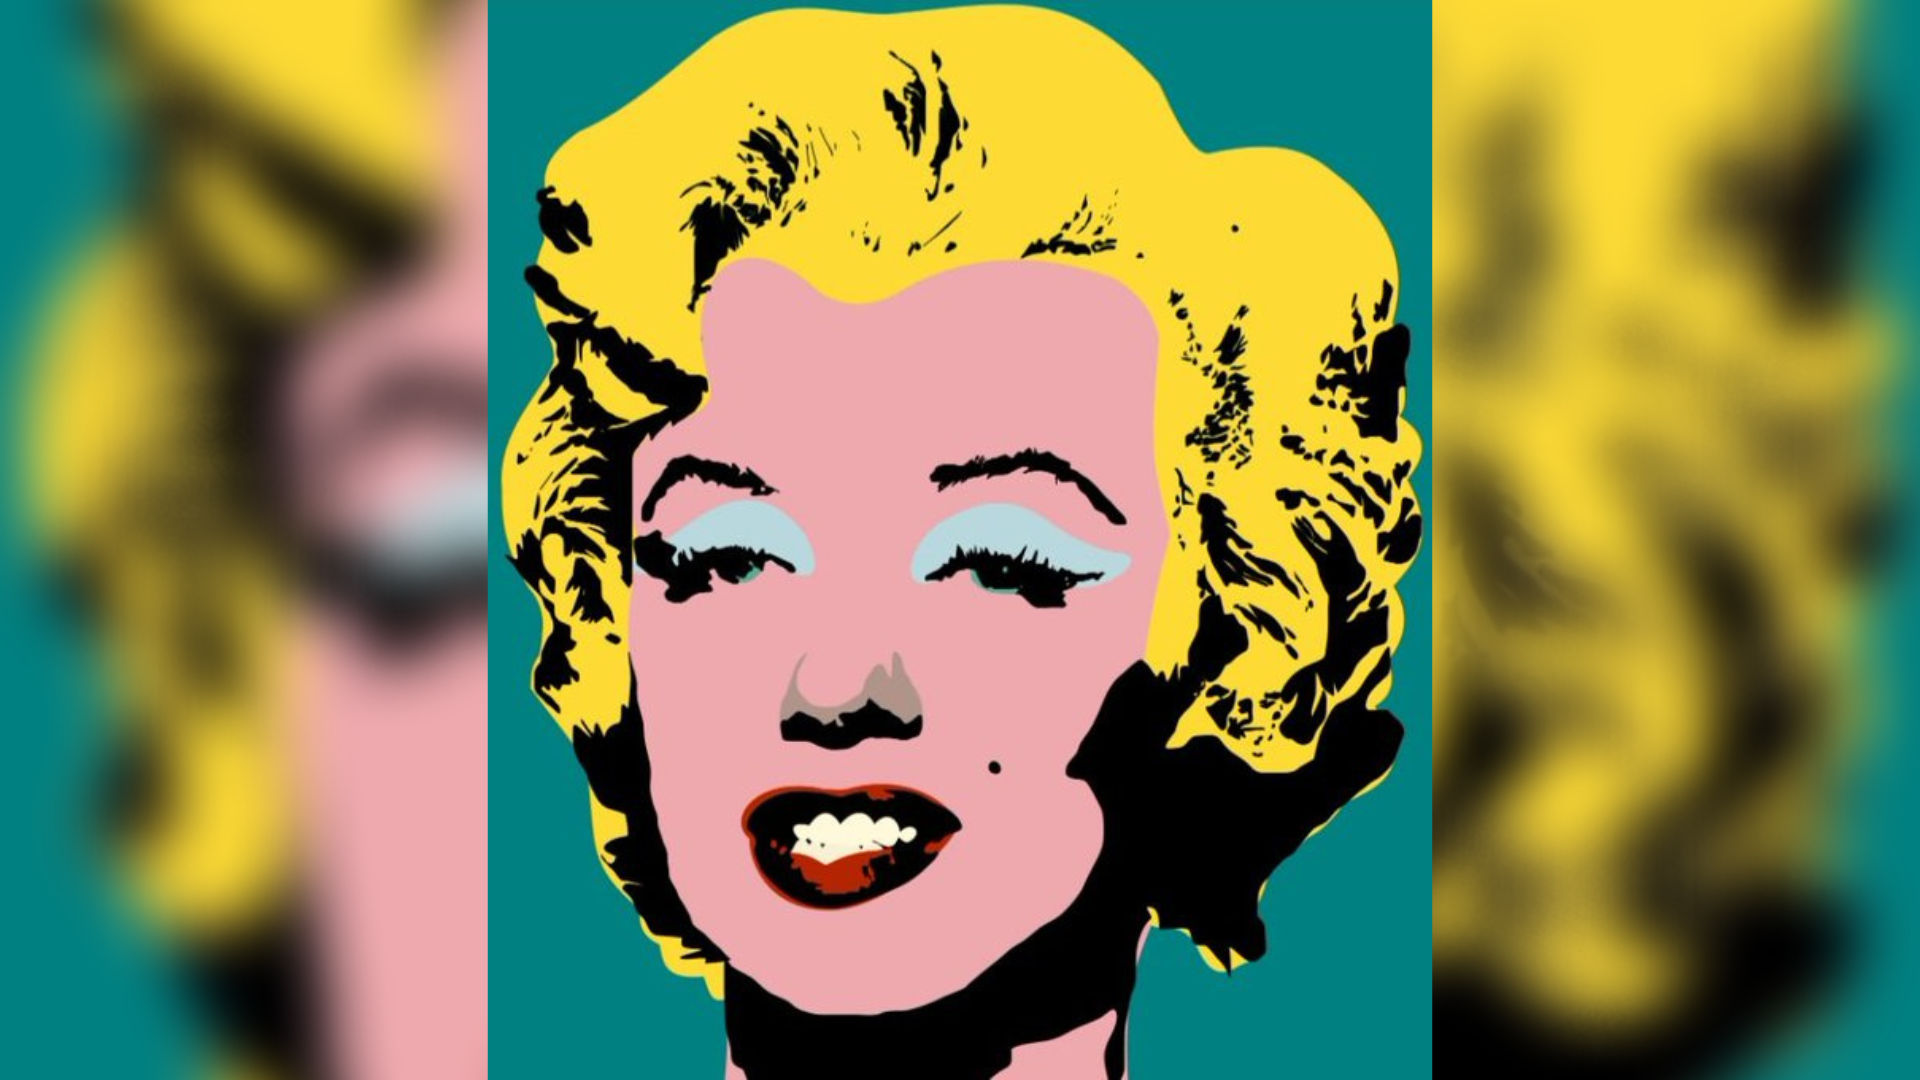 Andy Warhol’s portrait of Marylin Monroe expected to sell for $200 million